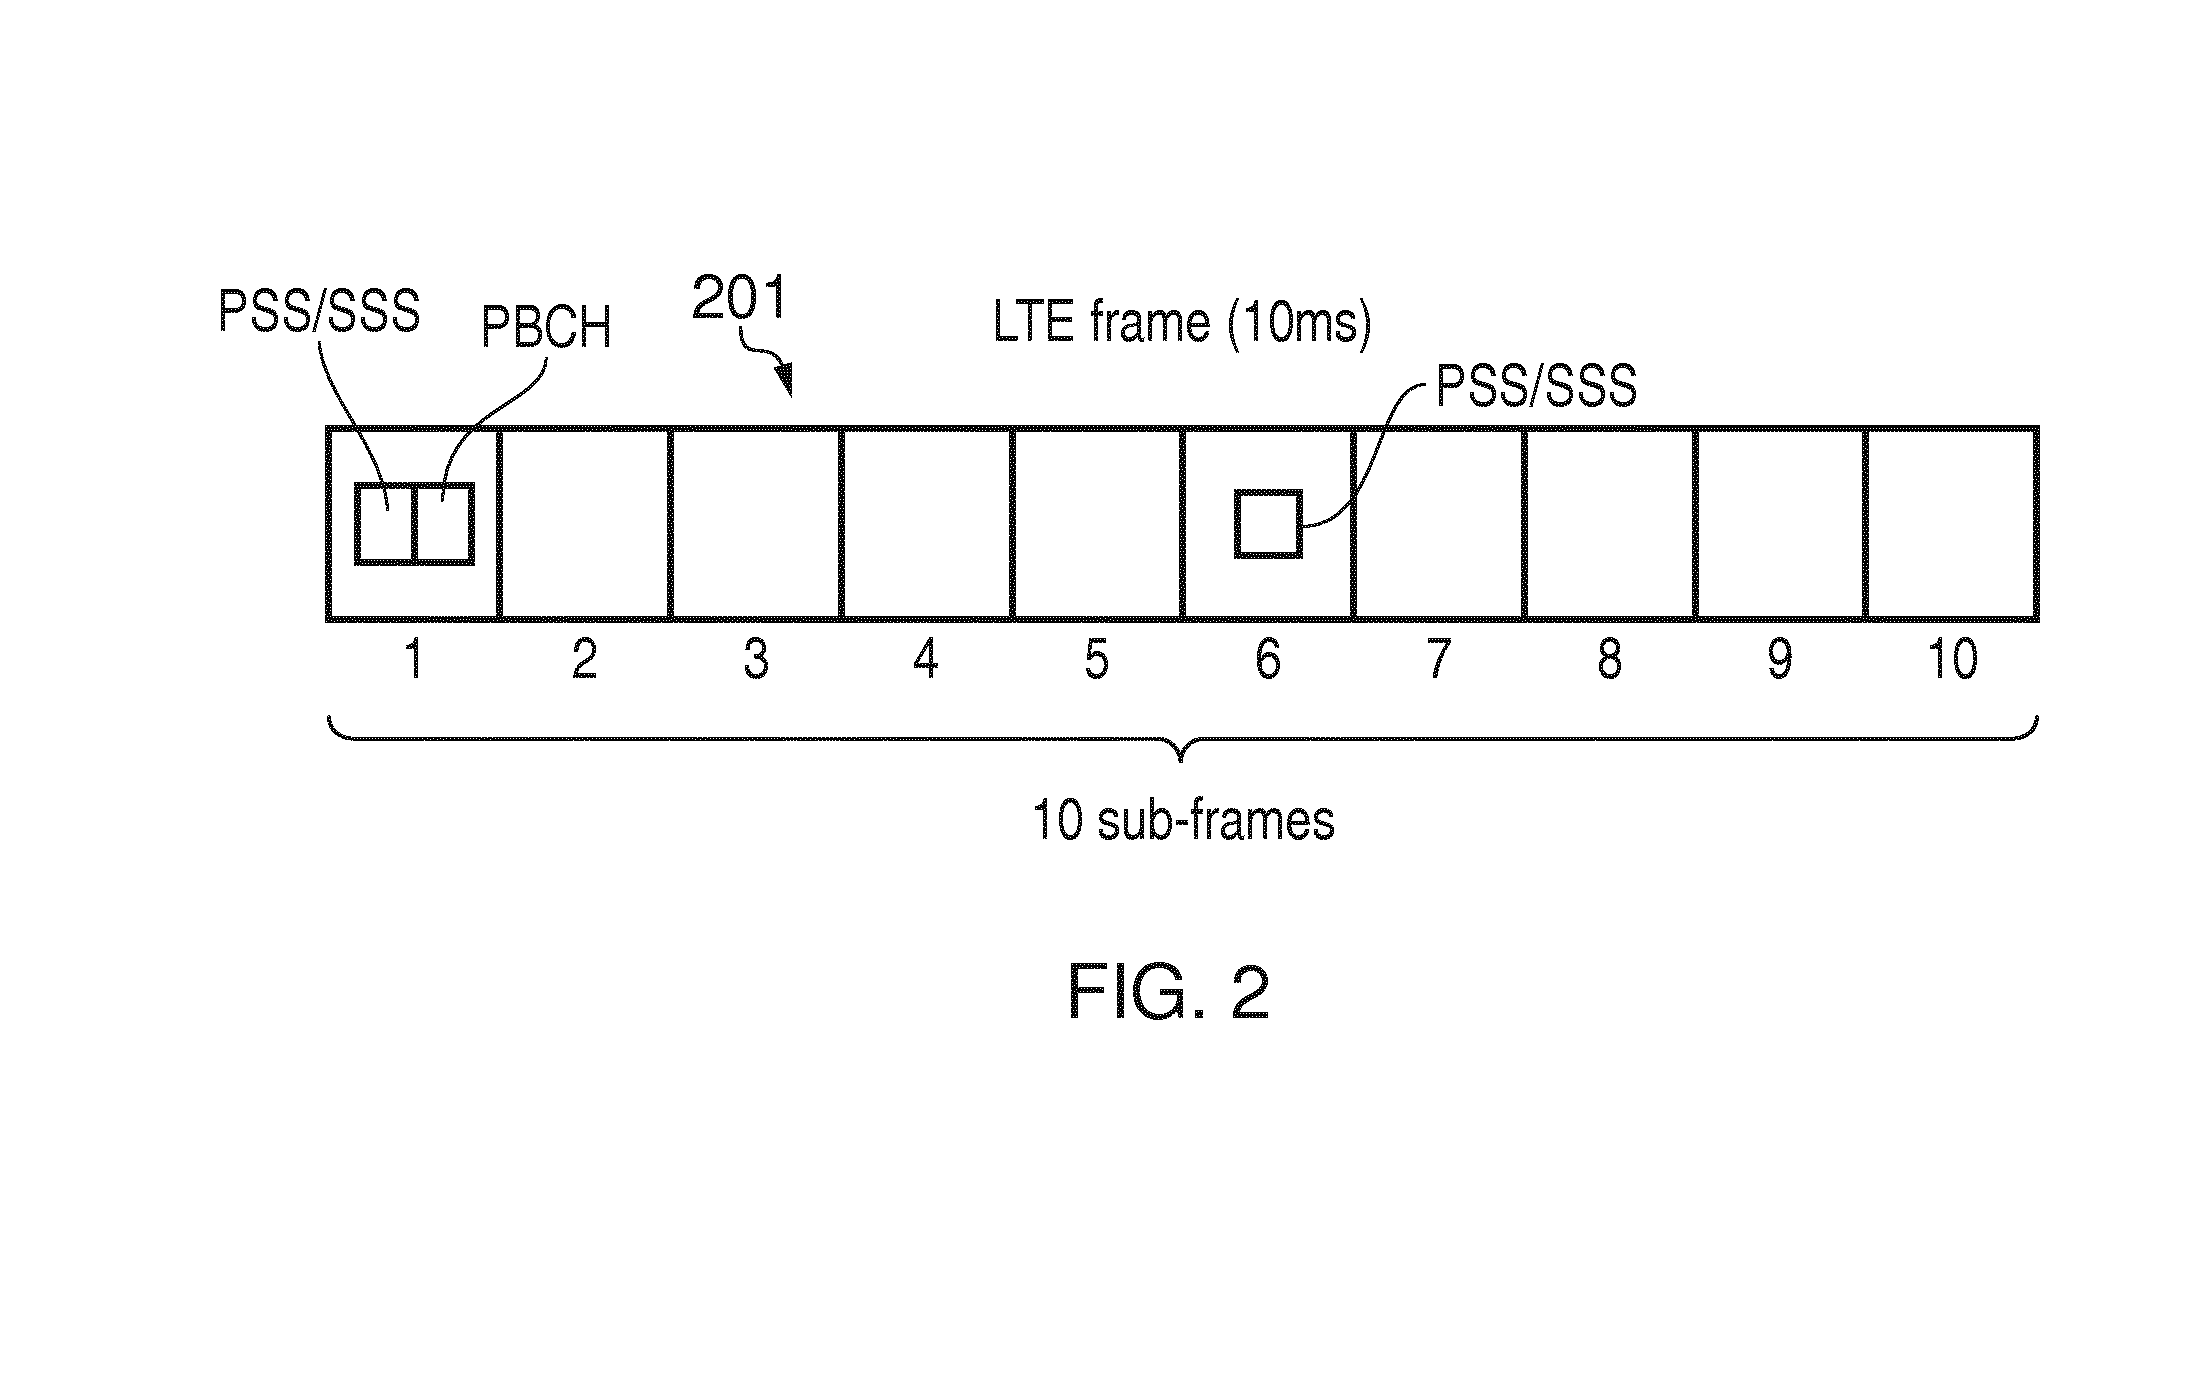 Transmission of measurement reports in a wireless communication system